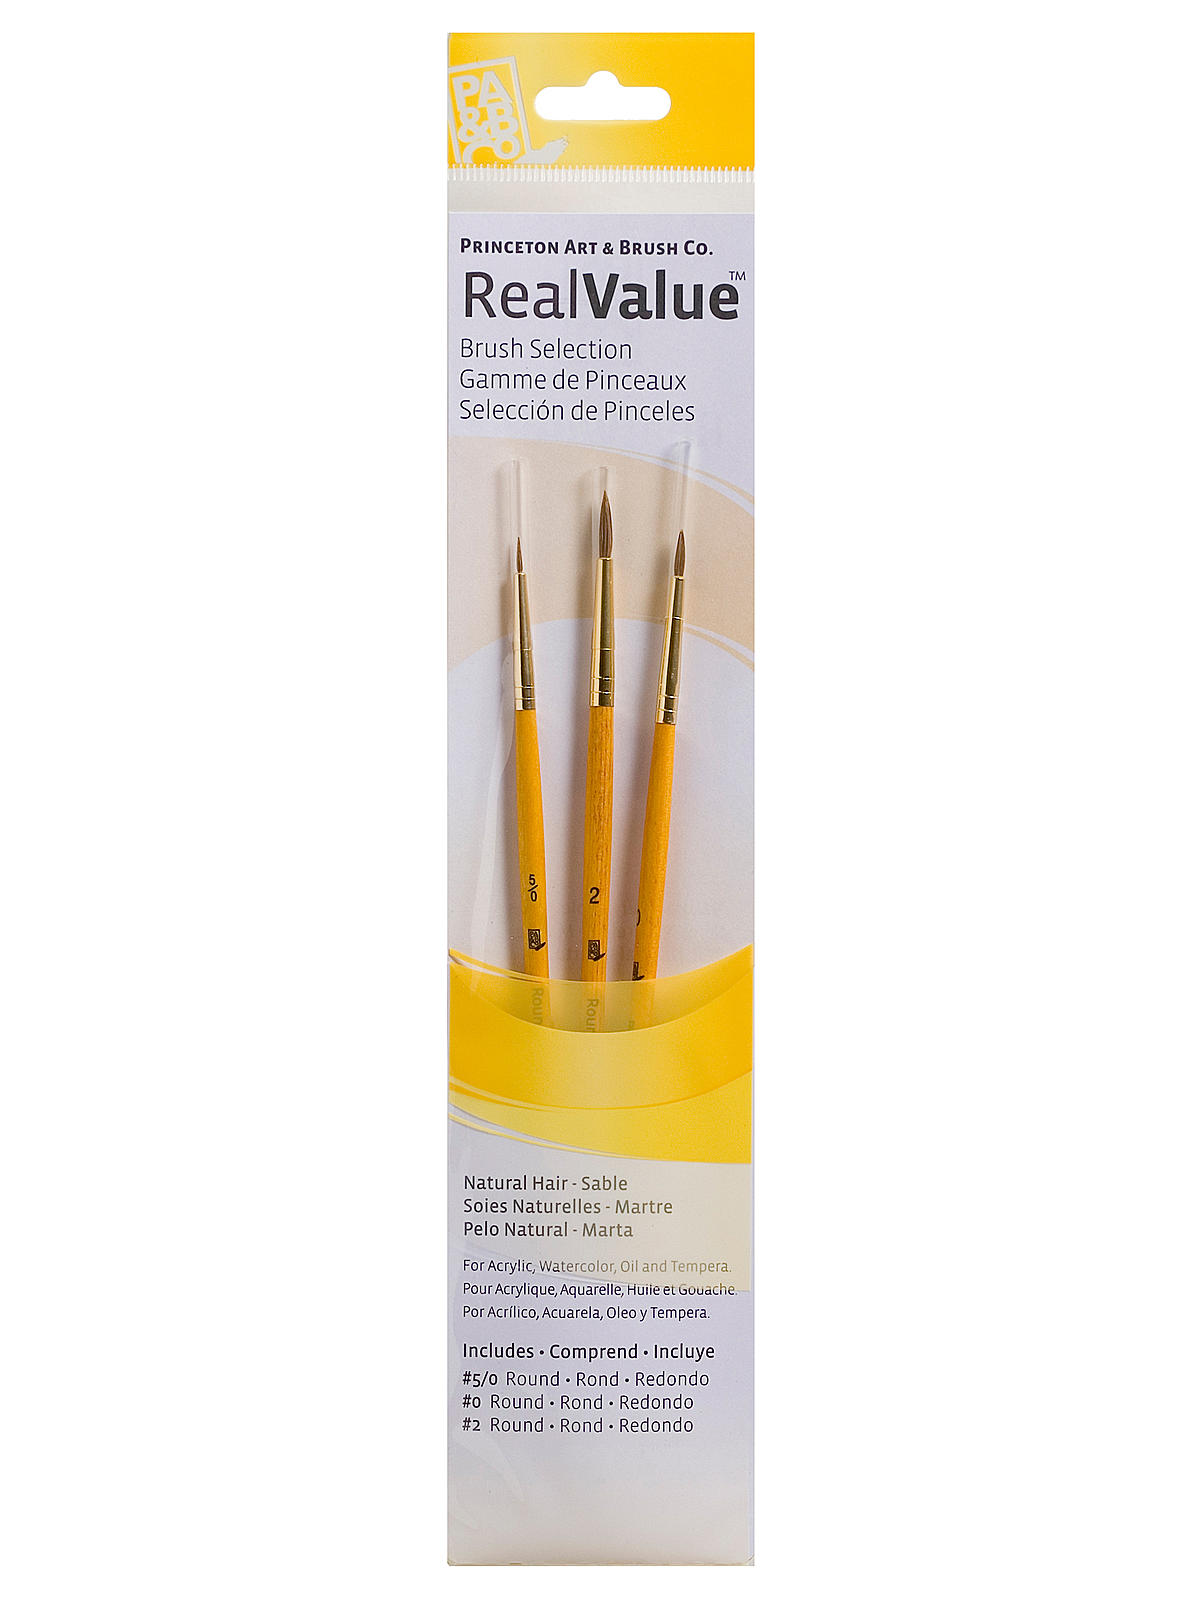 Real Value Series 9000 Yellow Handle Brush Sets 9105 Set Of 3